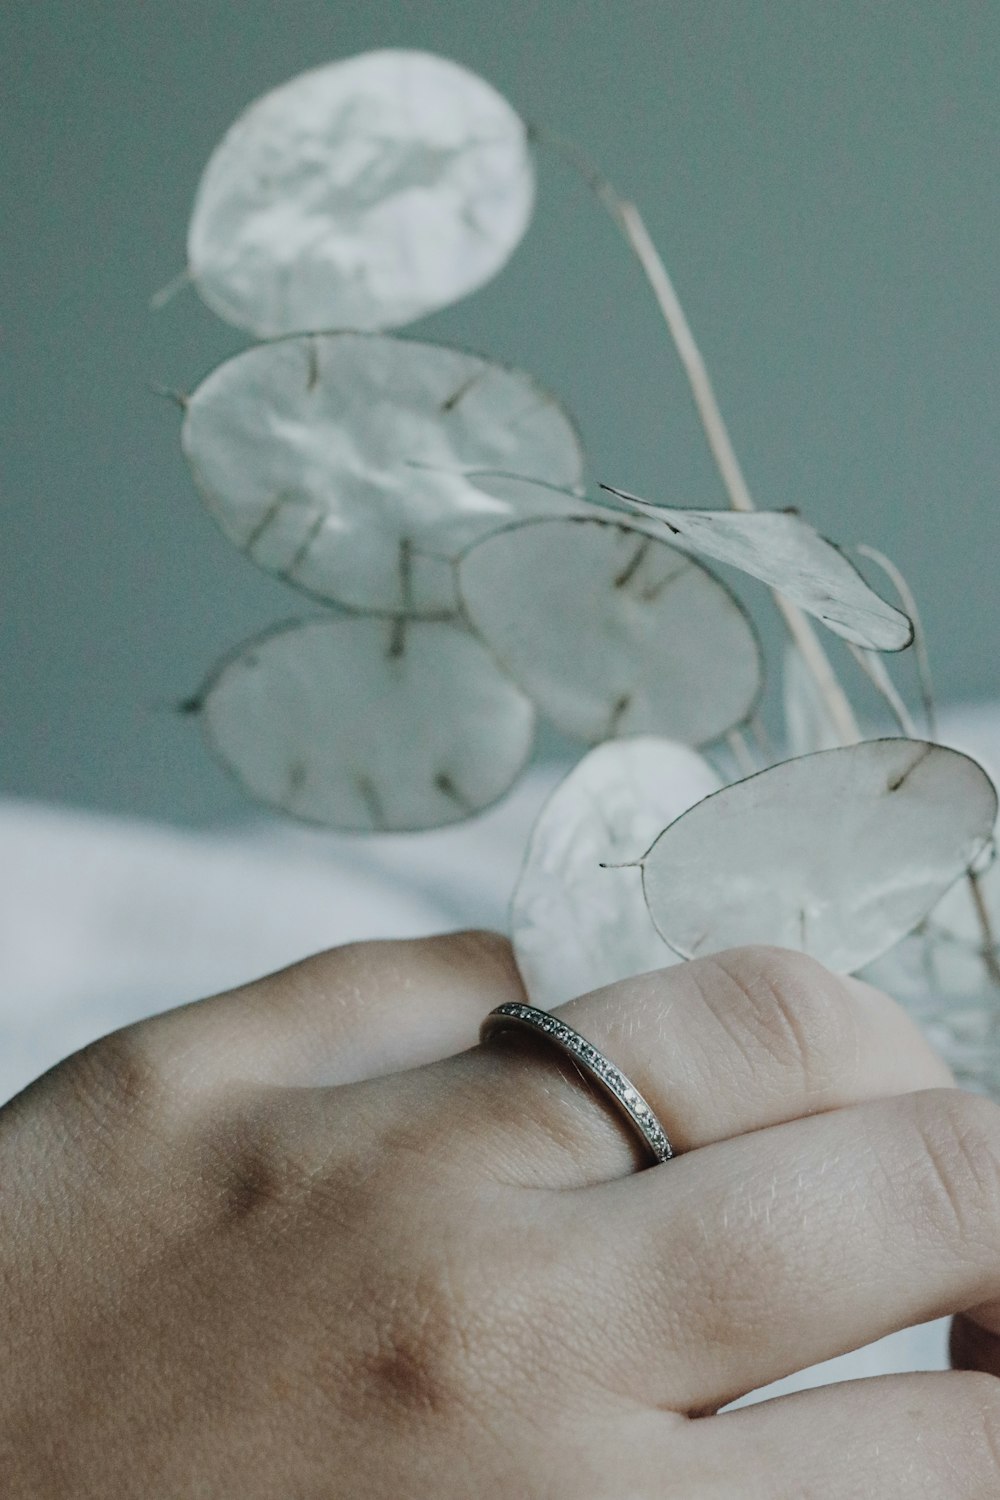 person wearing silver ring holding white flower